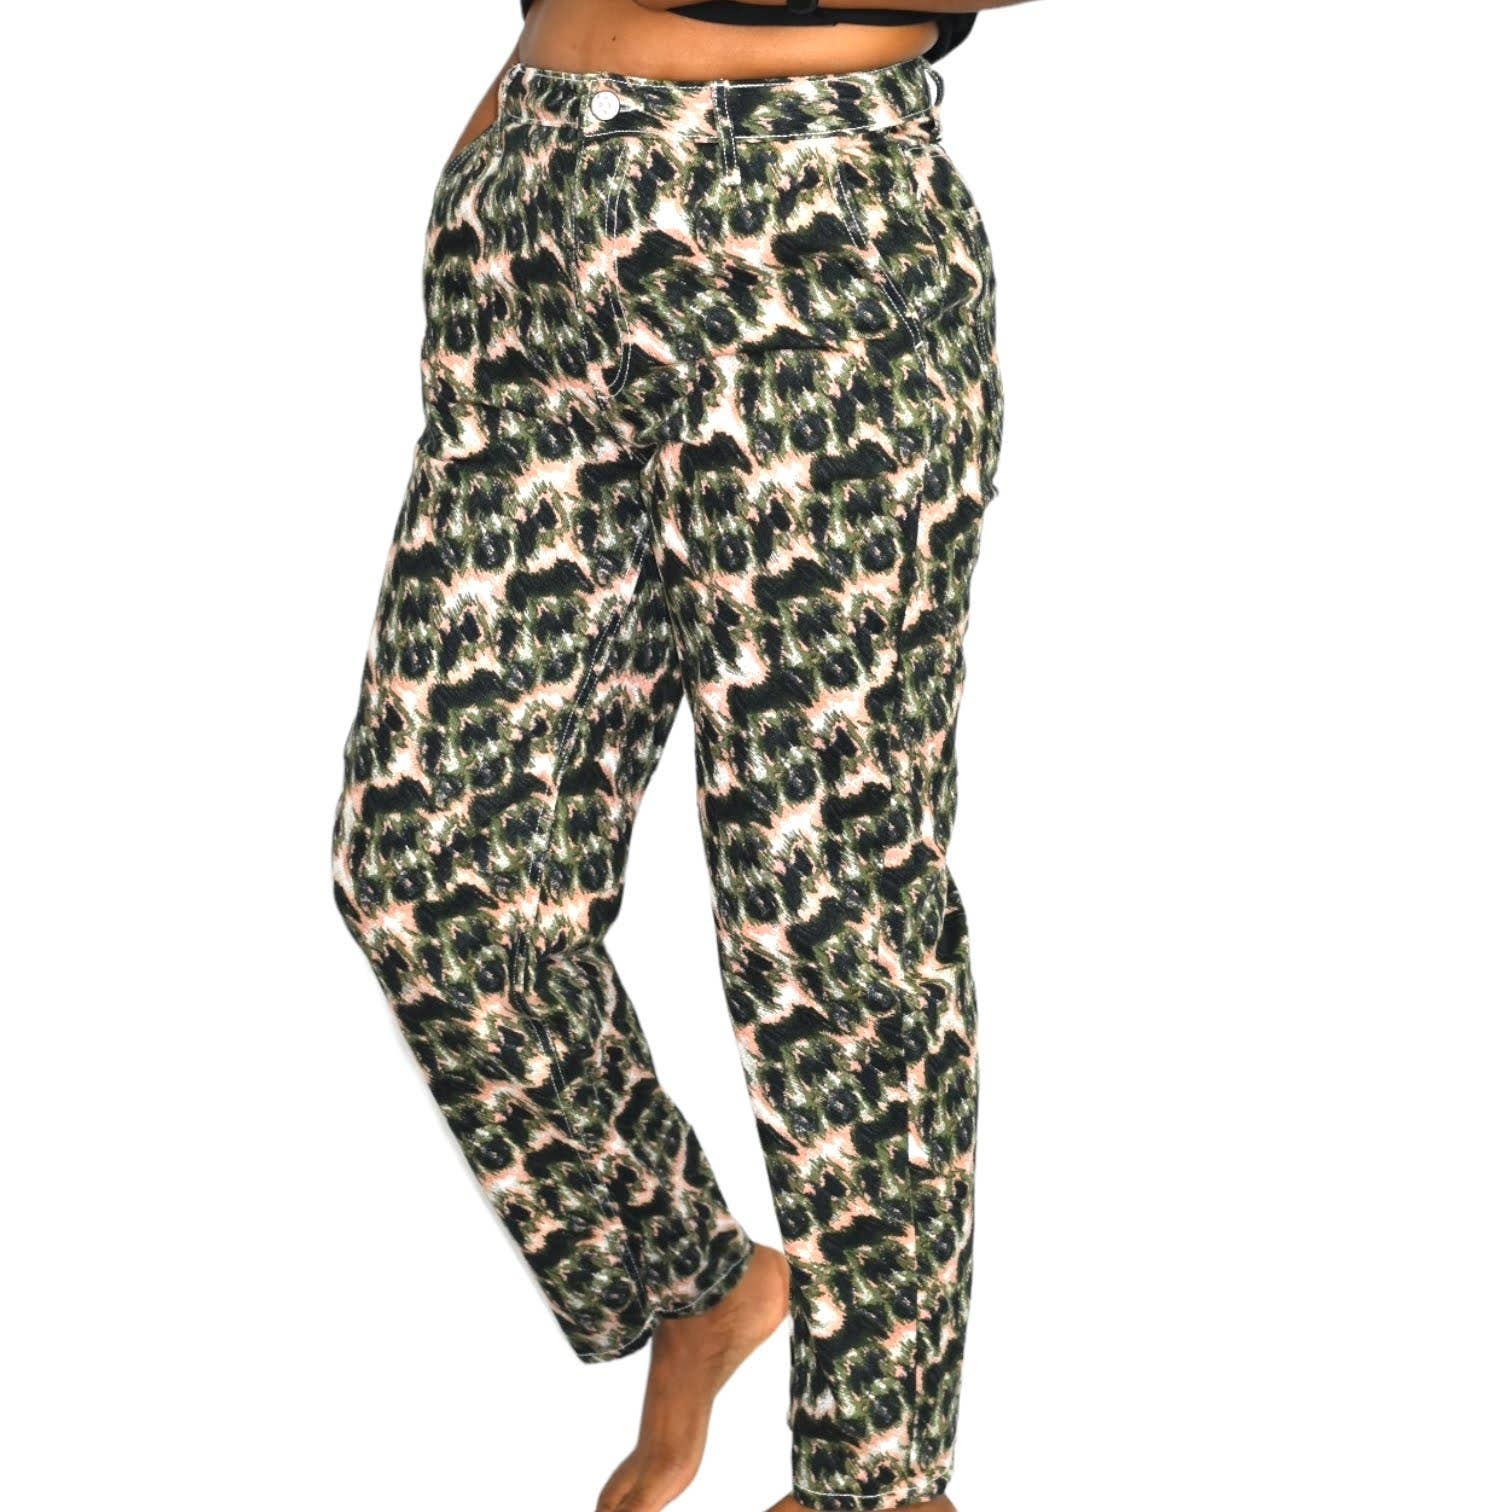 Rachel Comey Target Printed Jeans Tapered Green Abstract Animal High Waist Rigid Denim Size 4